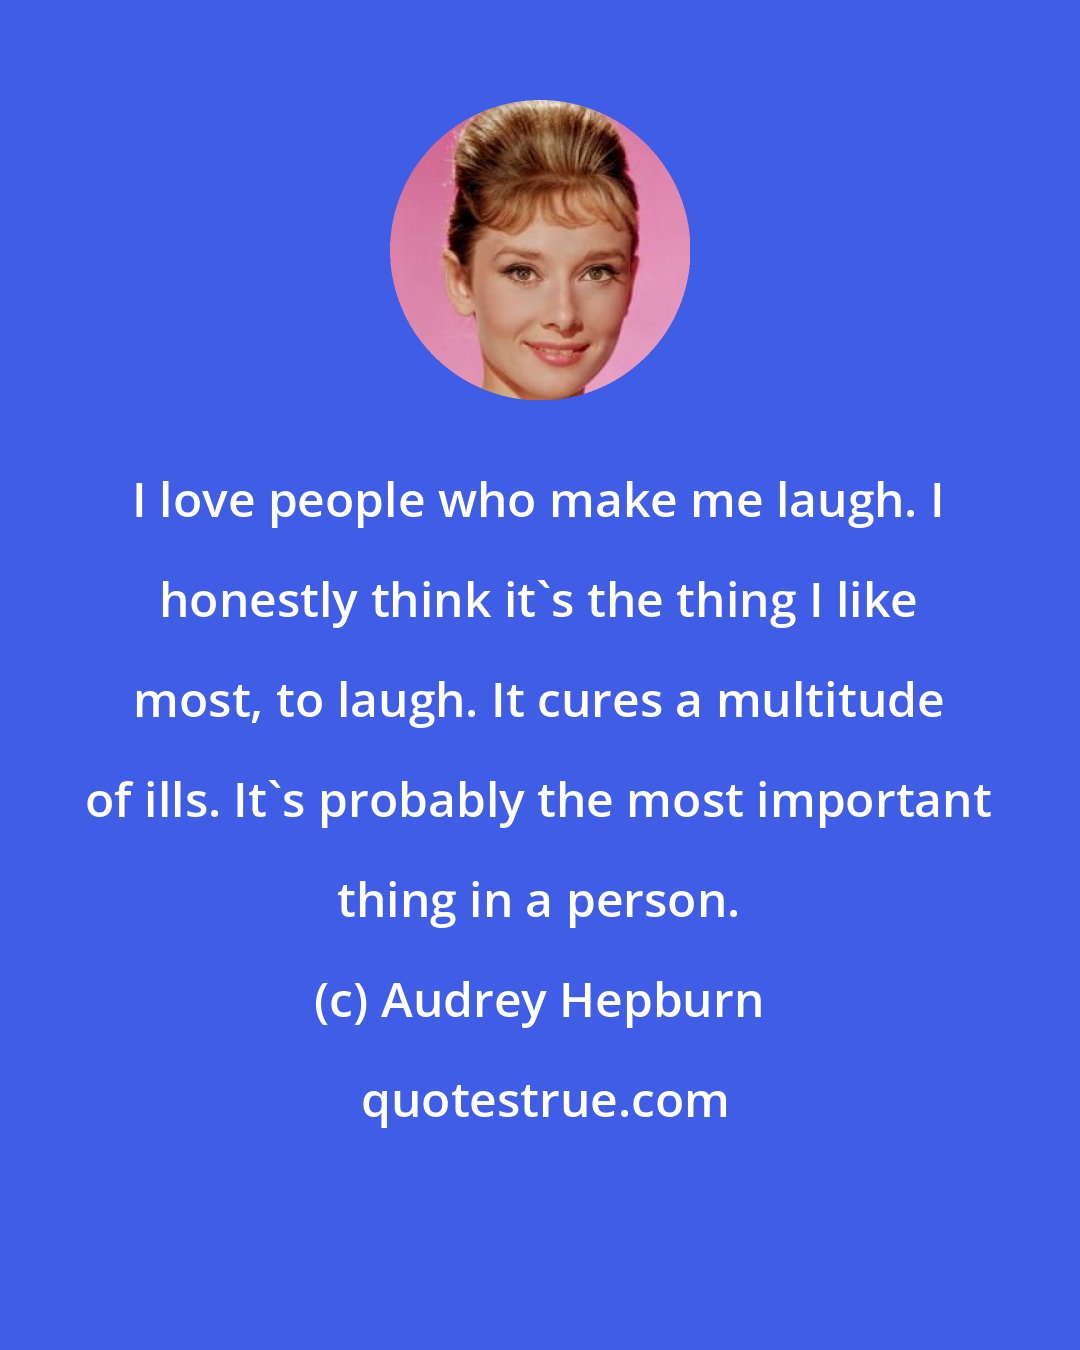 Audrey Hepburn: I love people who make me laugh. I honestly think it's the thing I like most, to laugh. It cures a multitude of ills. It's probably the most important thing in a person.